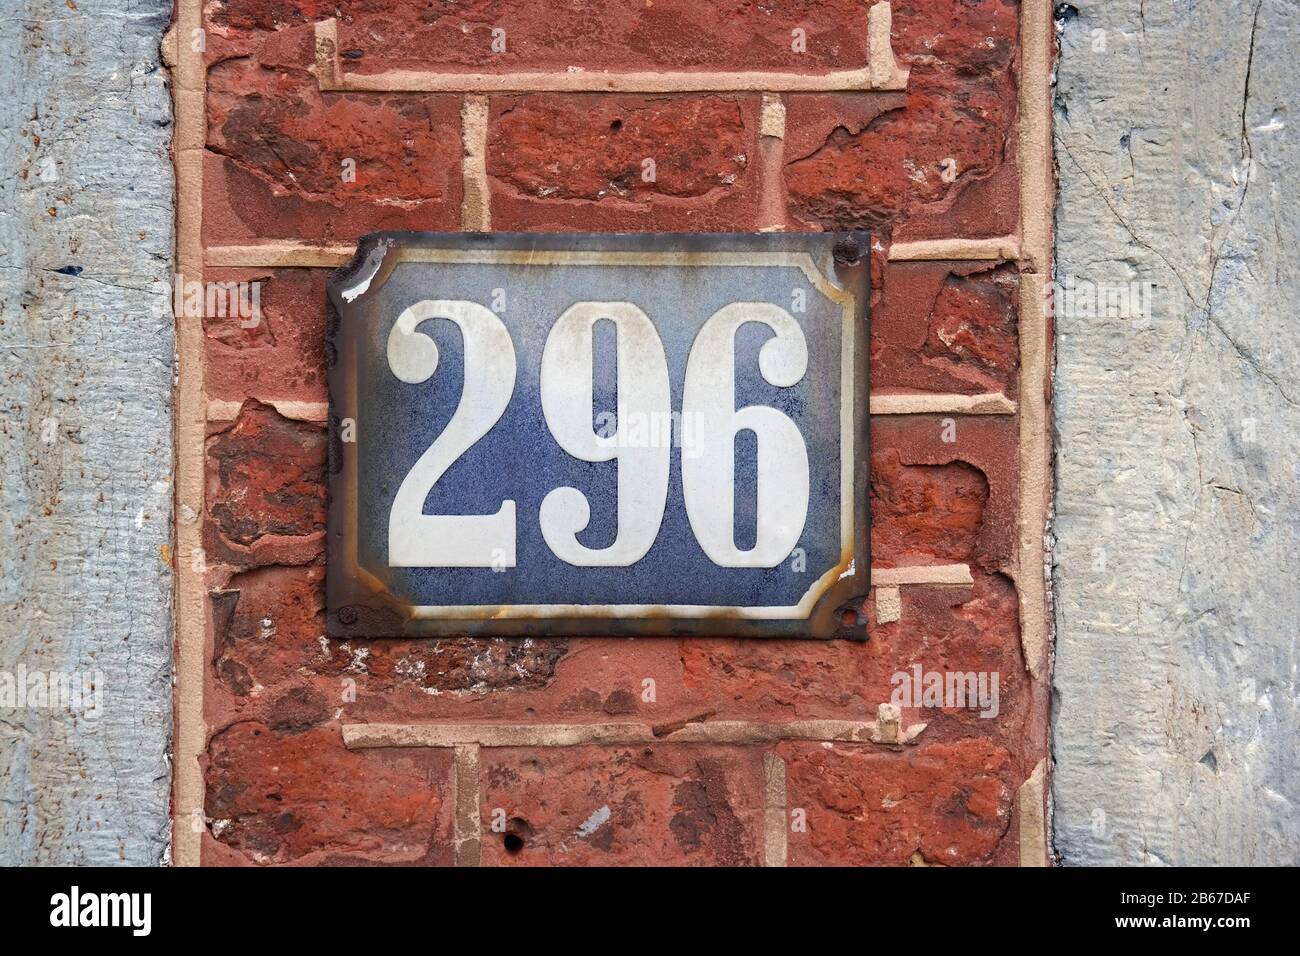 House Number 296 sign. Stock Photo